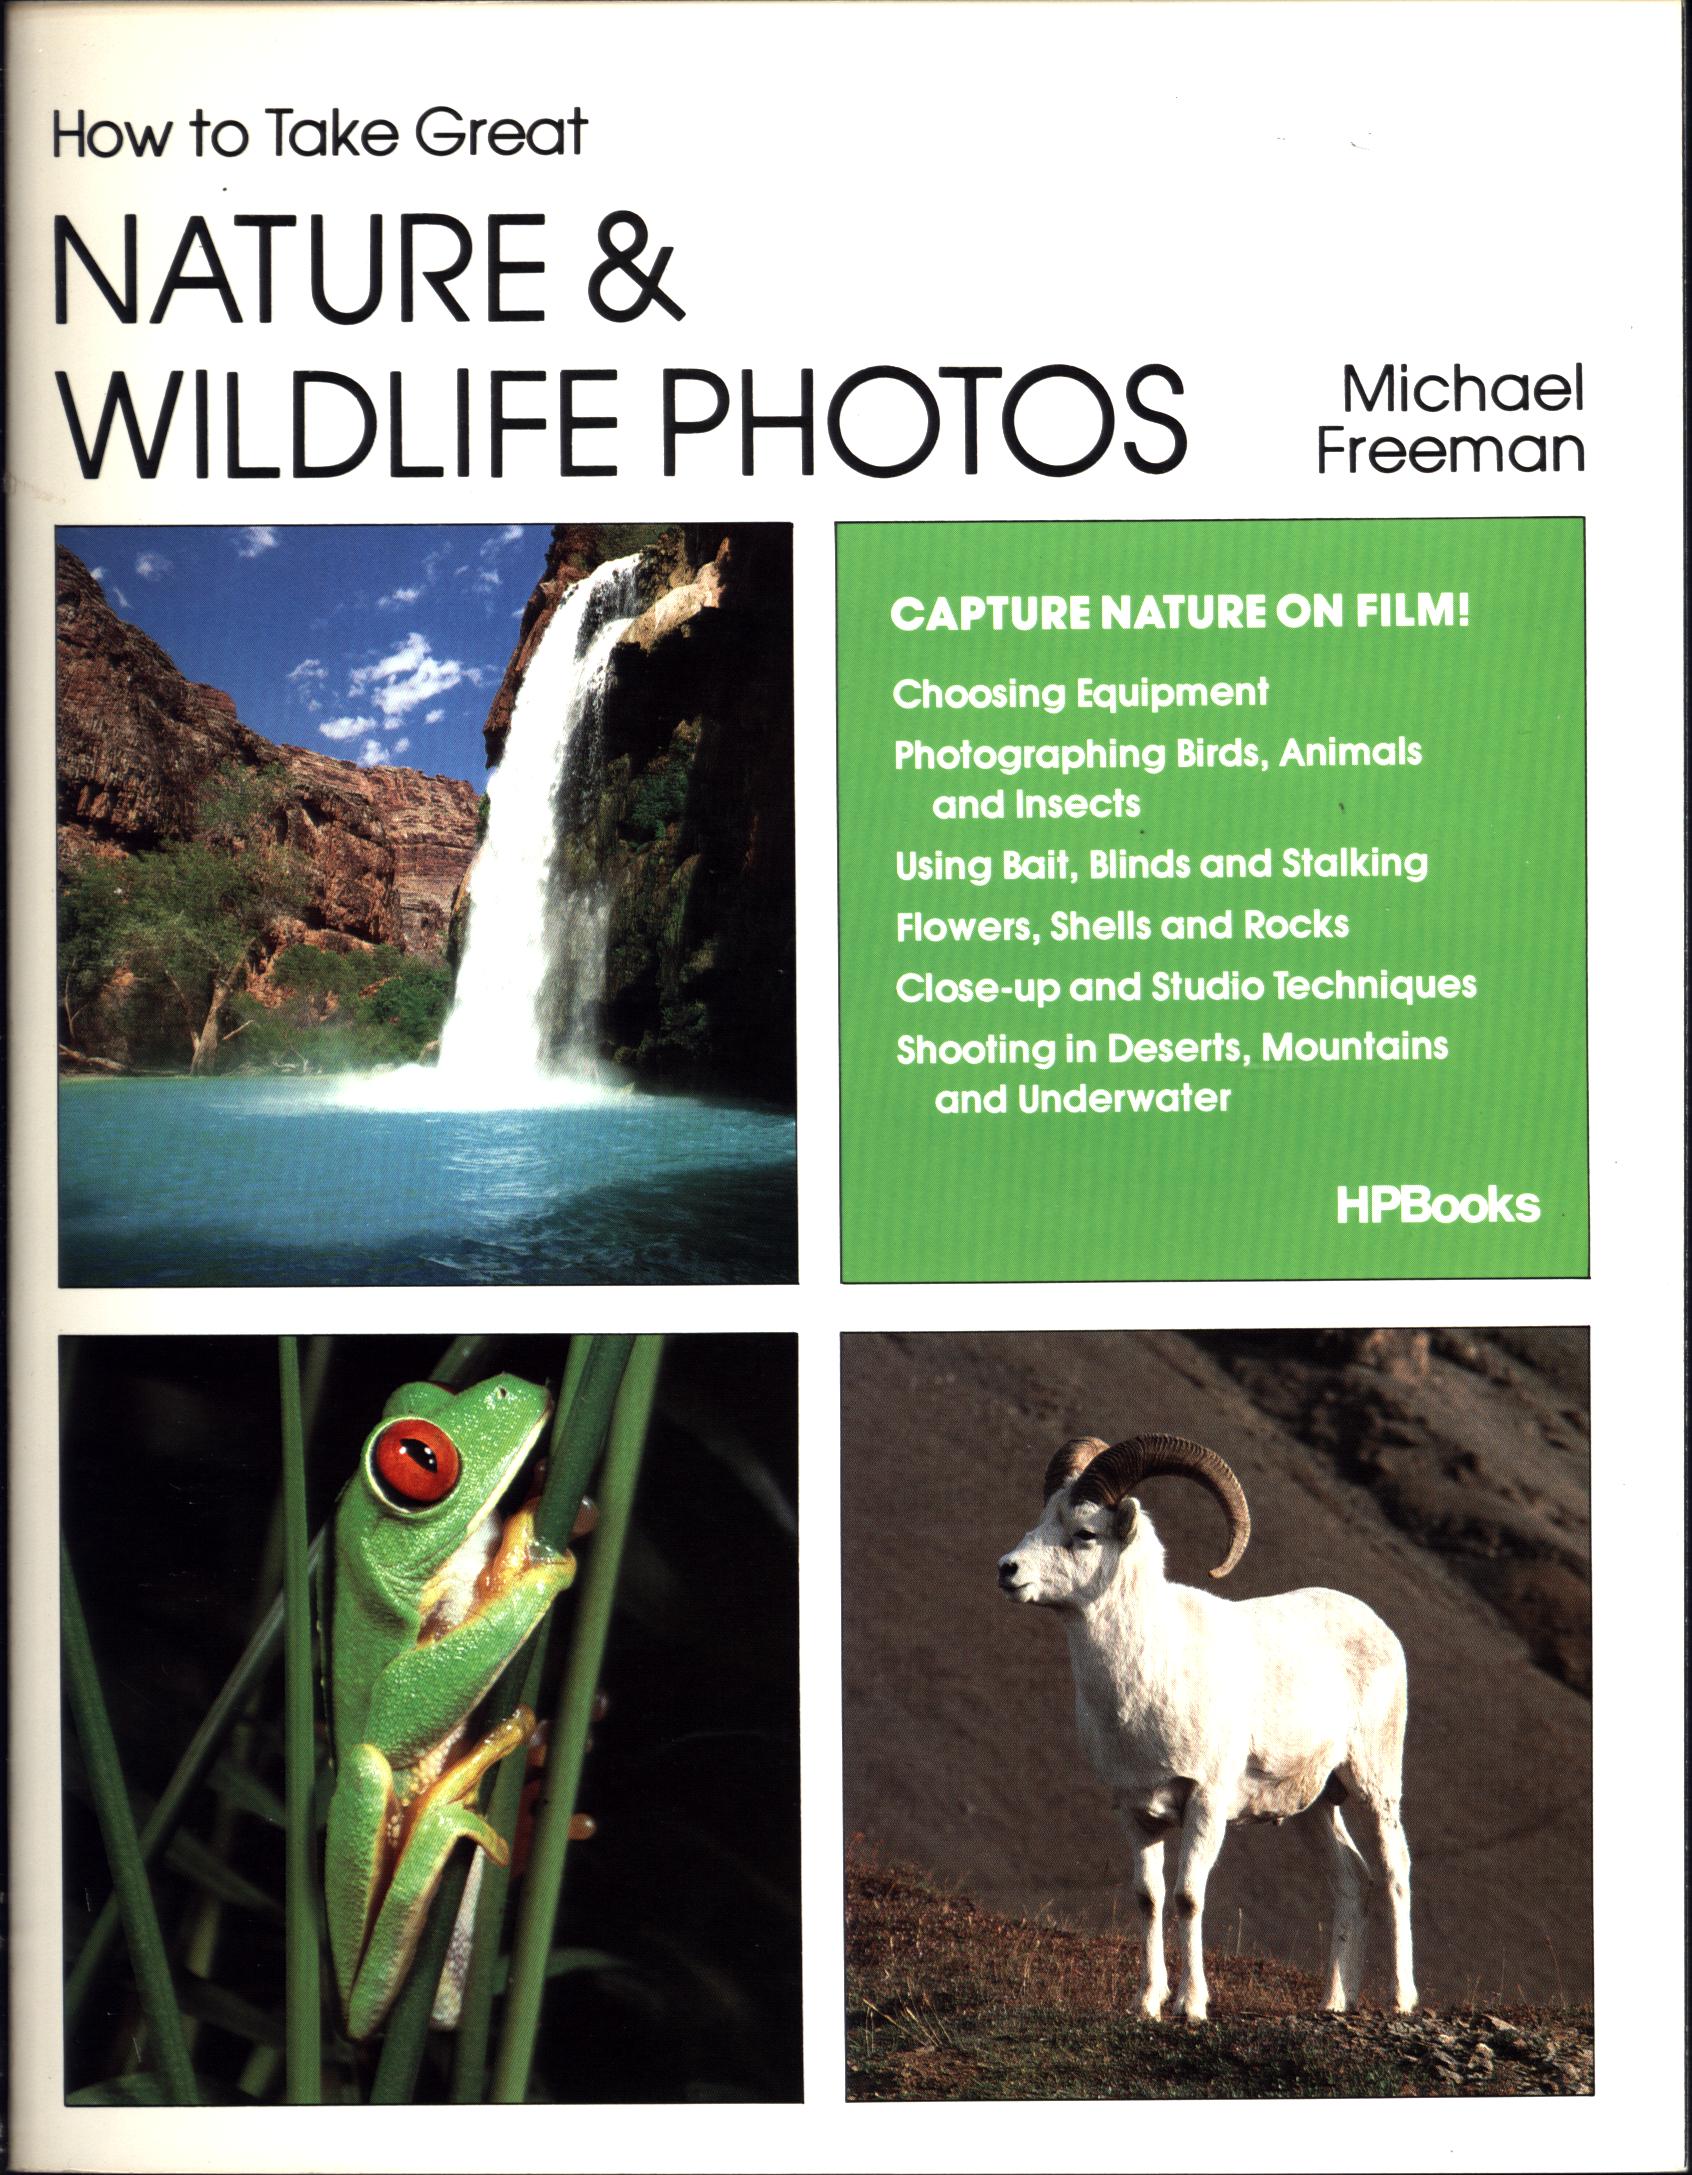 HOW TO TAKE GREAT NATURE & WILDLIFE PHOTOS. 